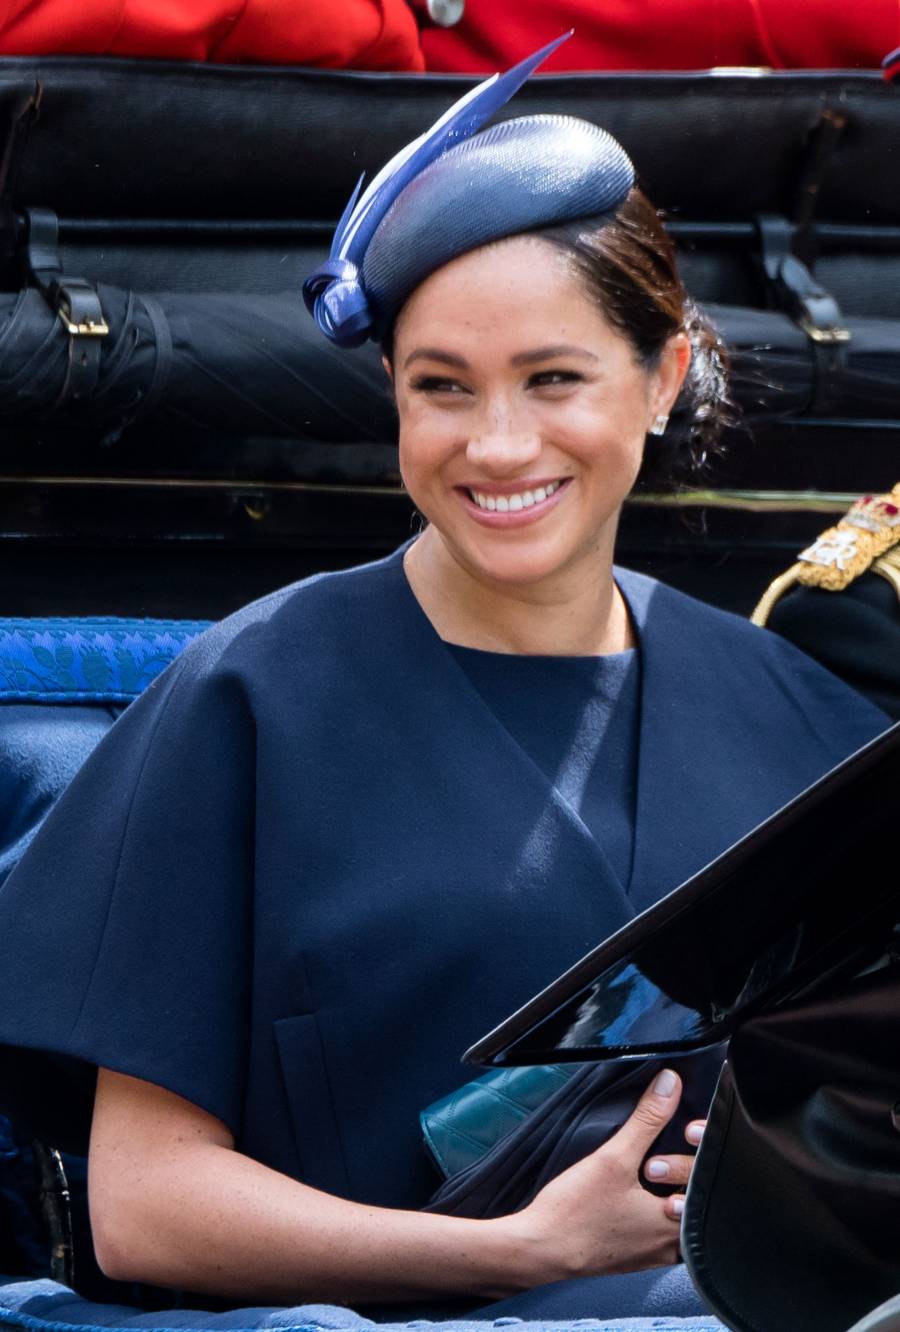 Duchess Meghan Attends Trooping the Colour Parade 1 Month After Giving Birth